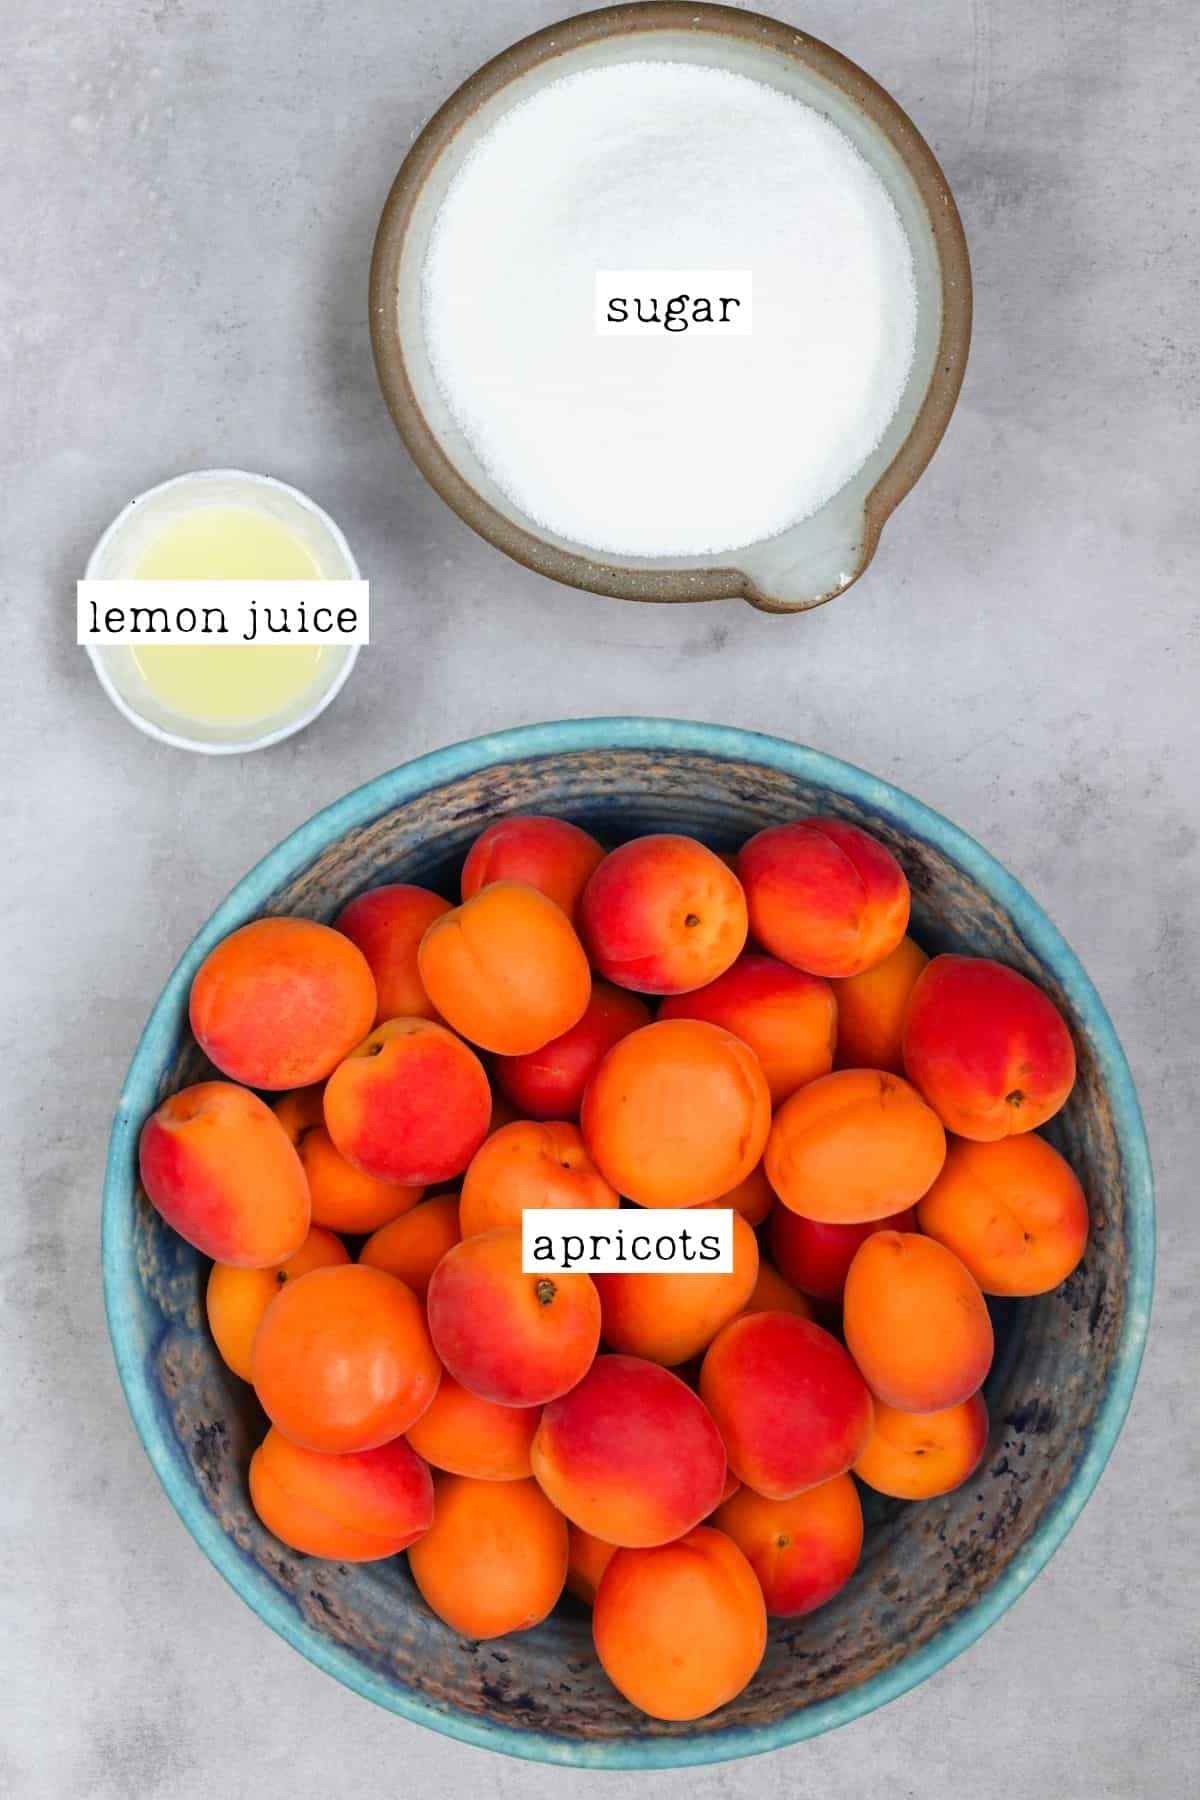 Ingredients for apricot jam